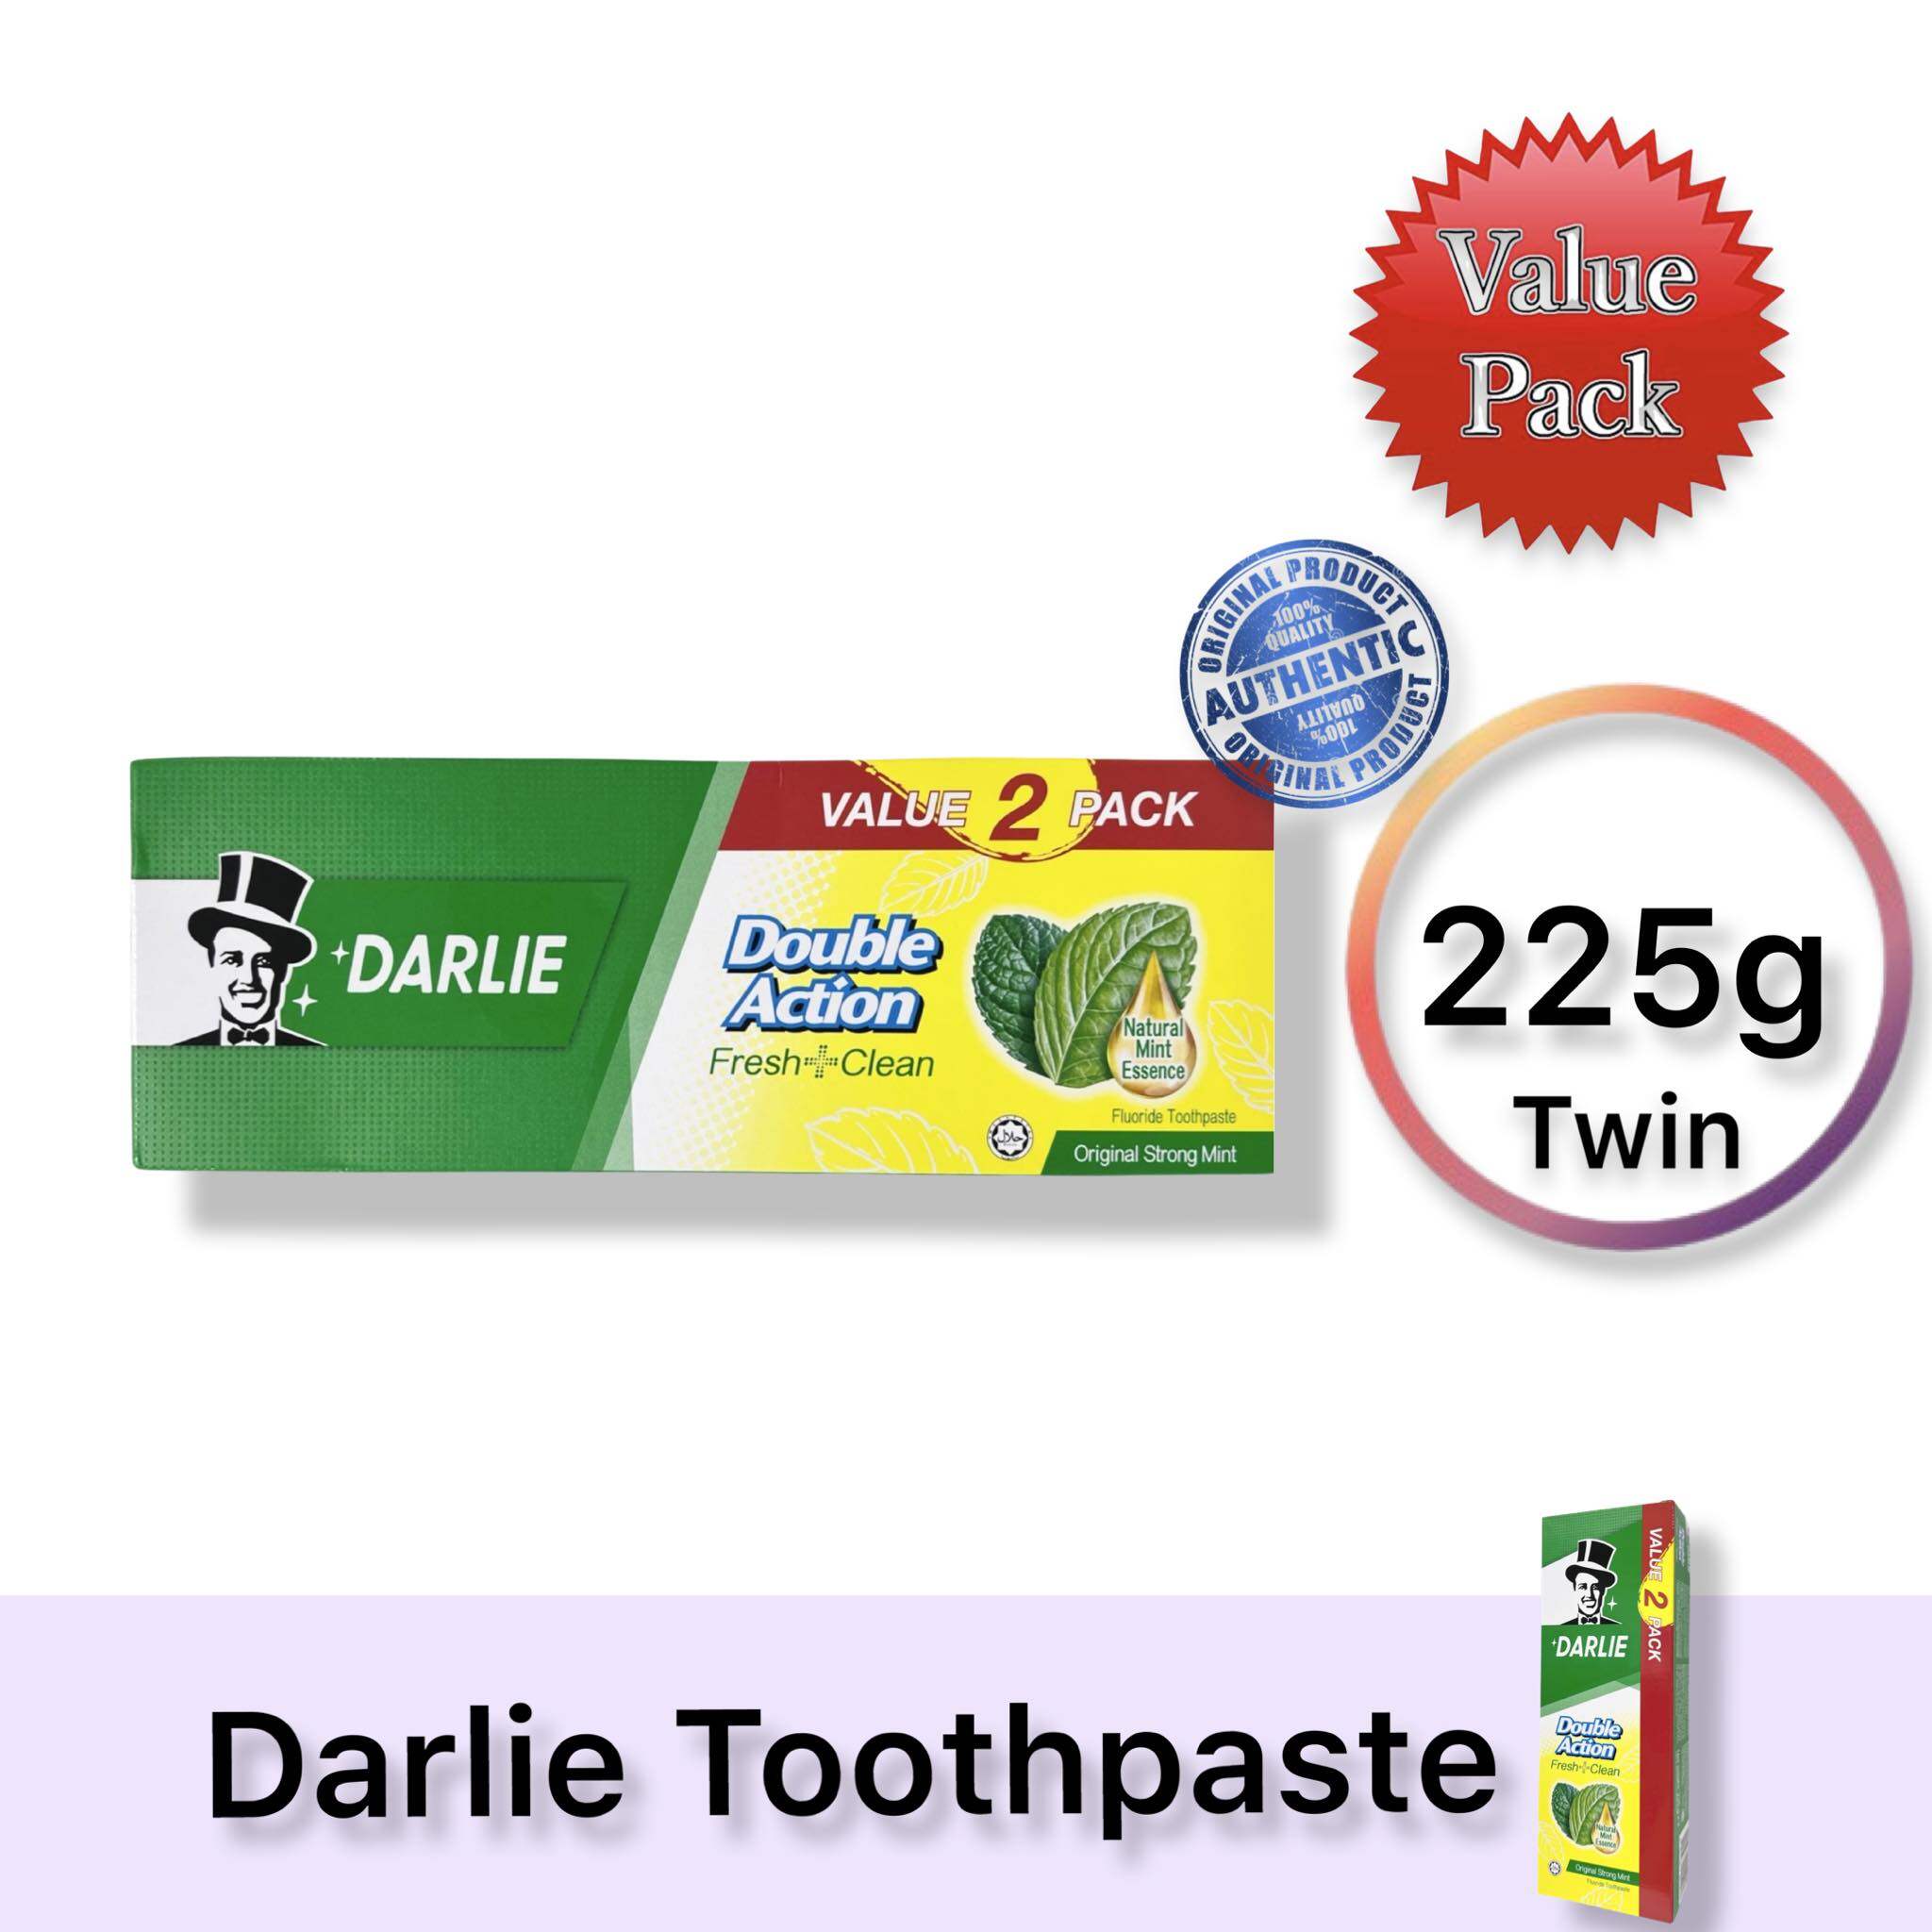 [Exp 11/2025] Darlie Double Action Fresh + Clean Toothpaste Original Strong Mint 225g x 2 (Value Pack)